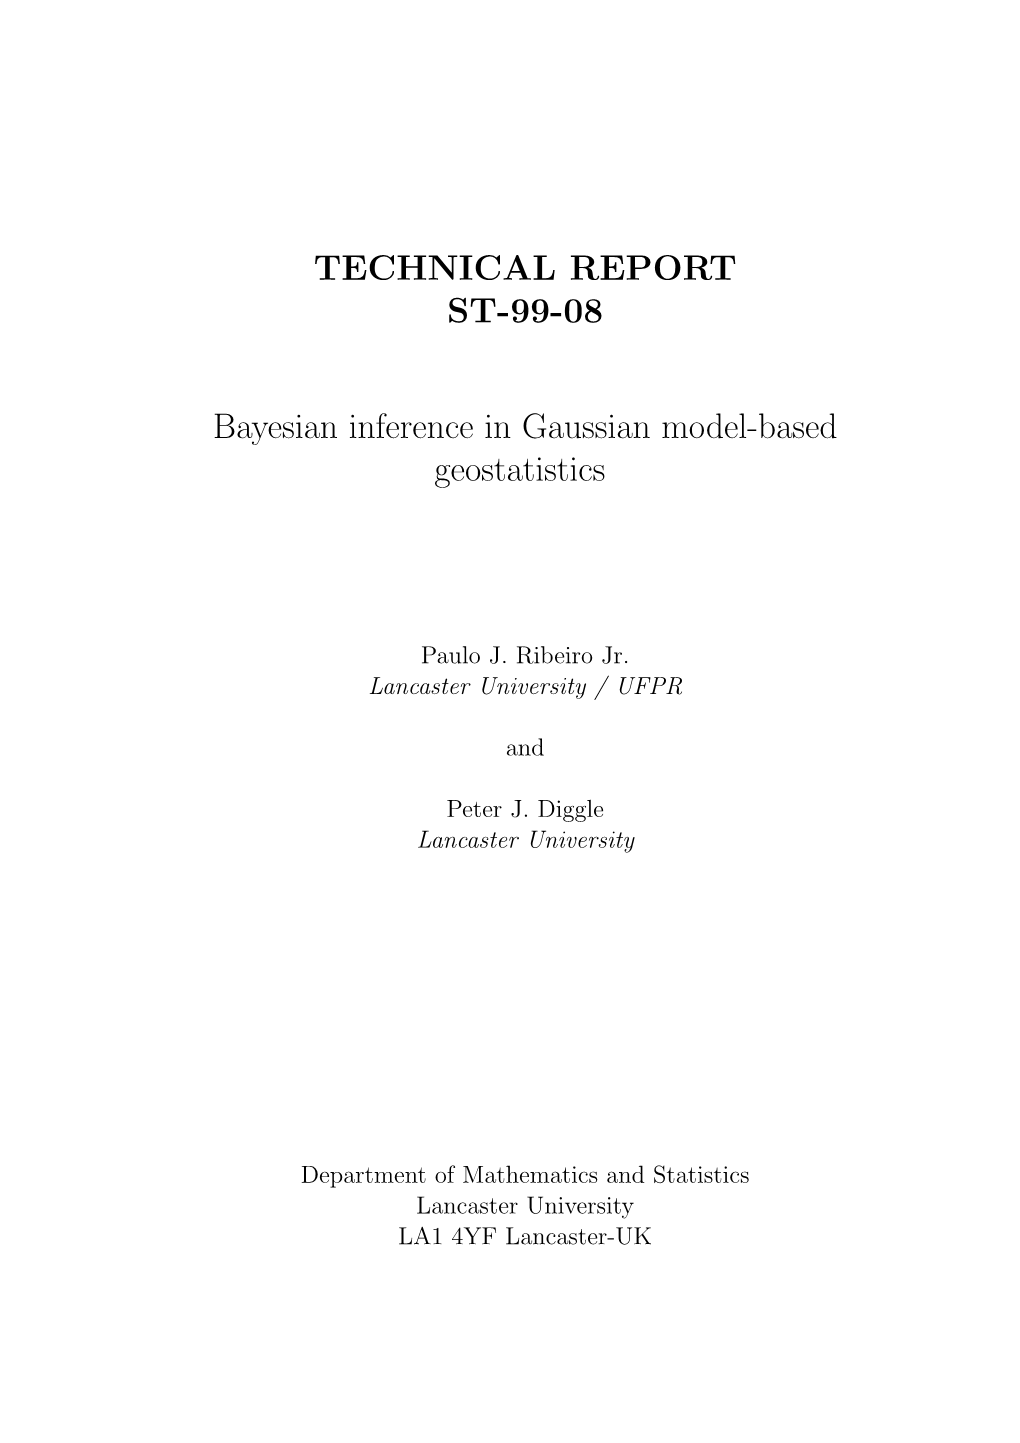 TECHNICAL REPORT ST-99-08 Bayesian Inference in Gaussian